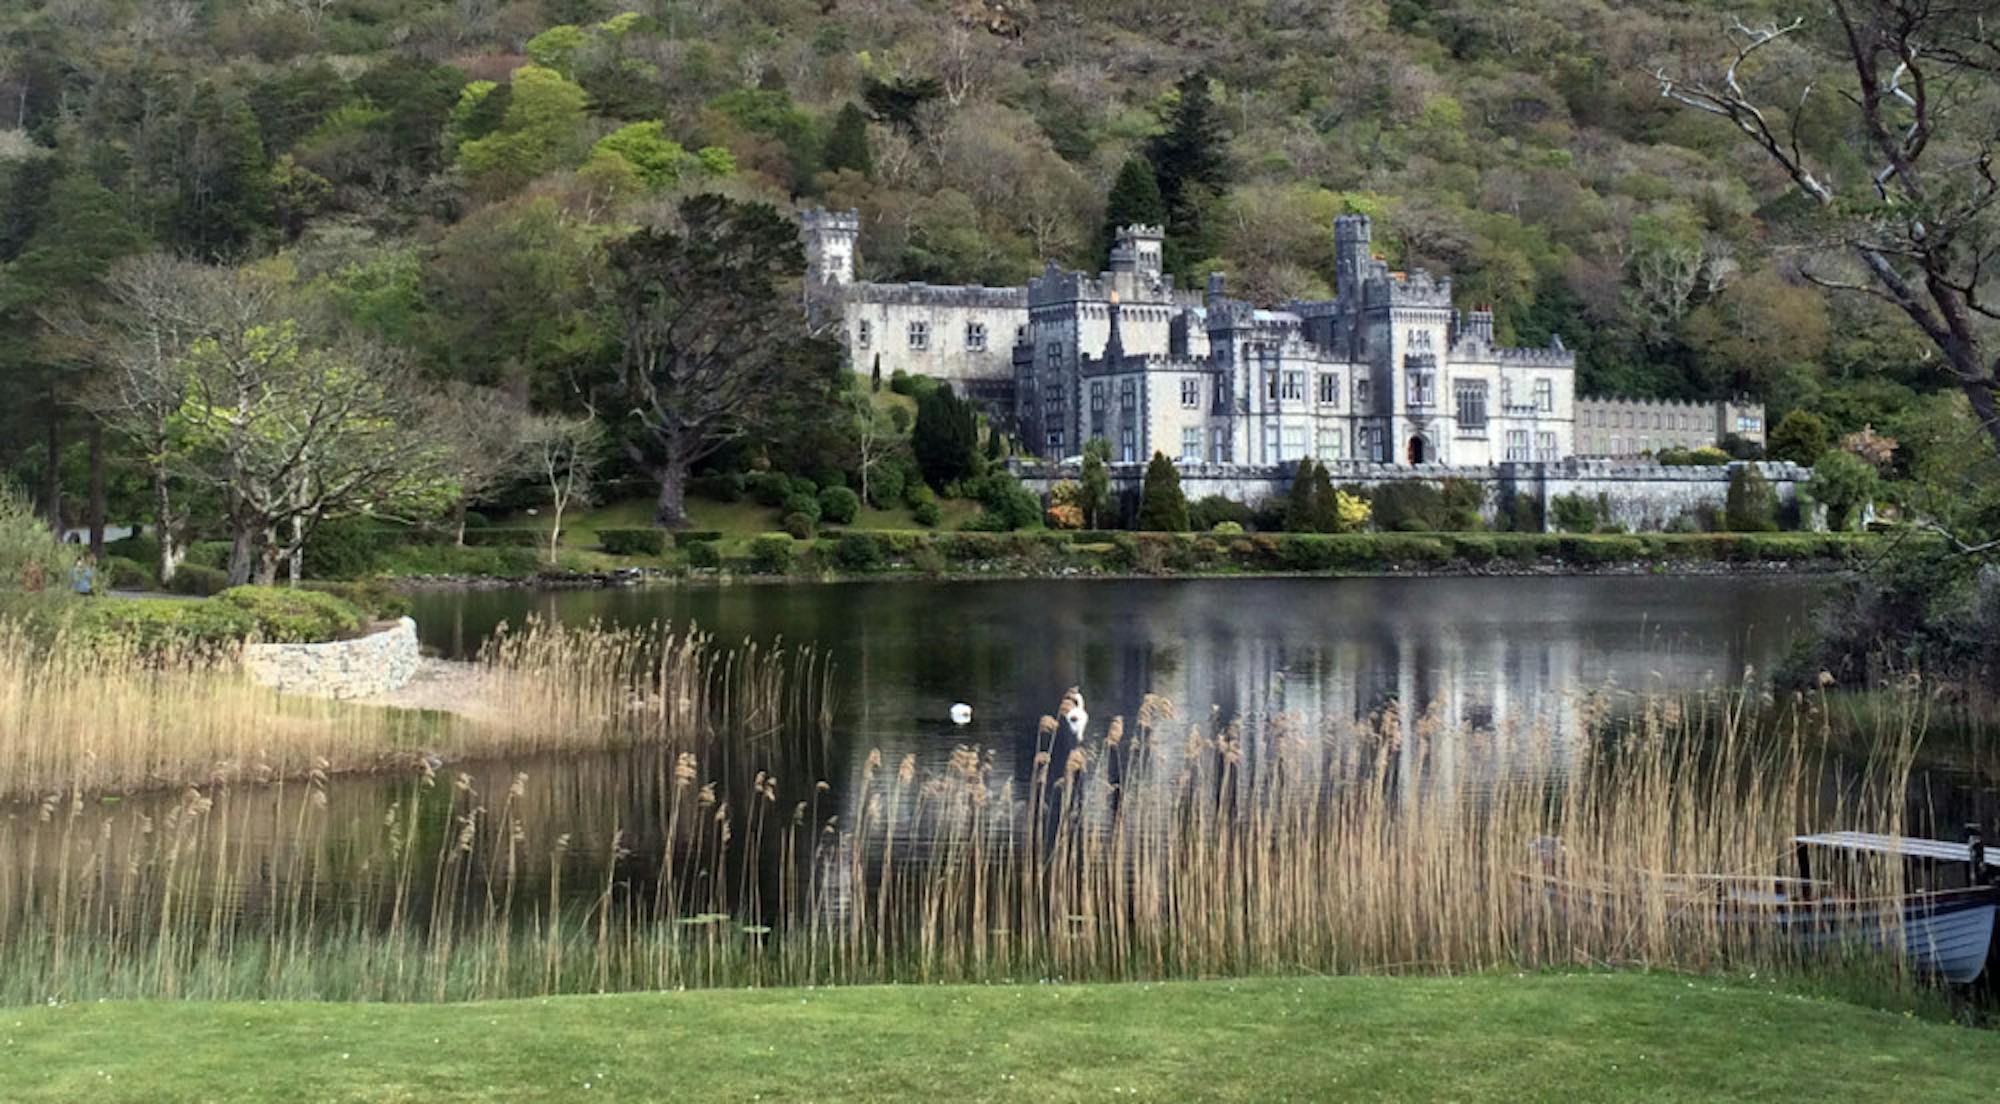 Students participating in a new summer study abroad program sponsored by the English department in Ireland will spend a week at Kylemore Abbey, pictured.